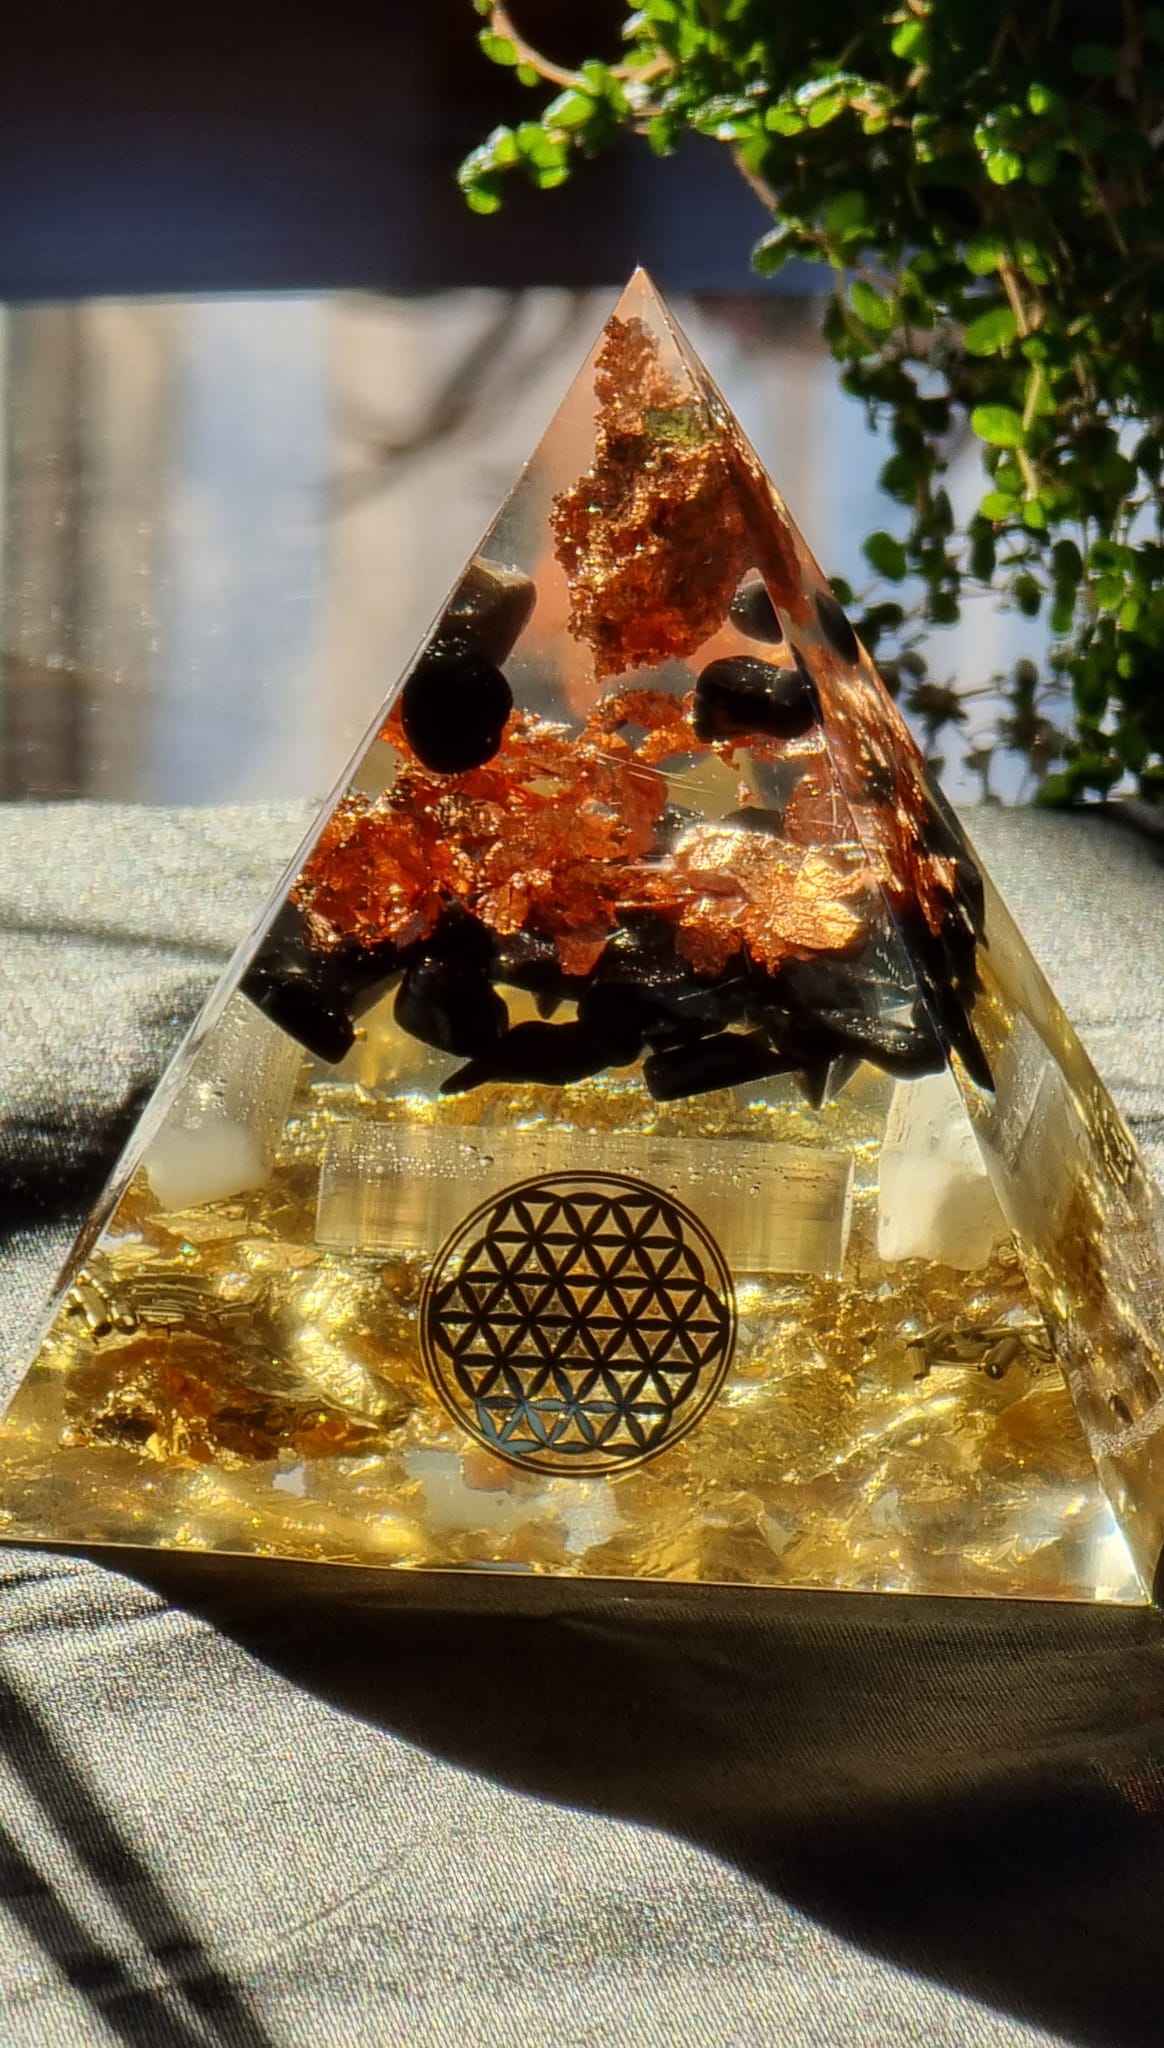 Protection Orgonite for Healing